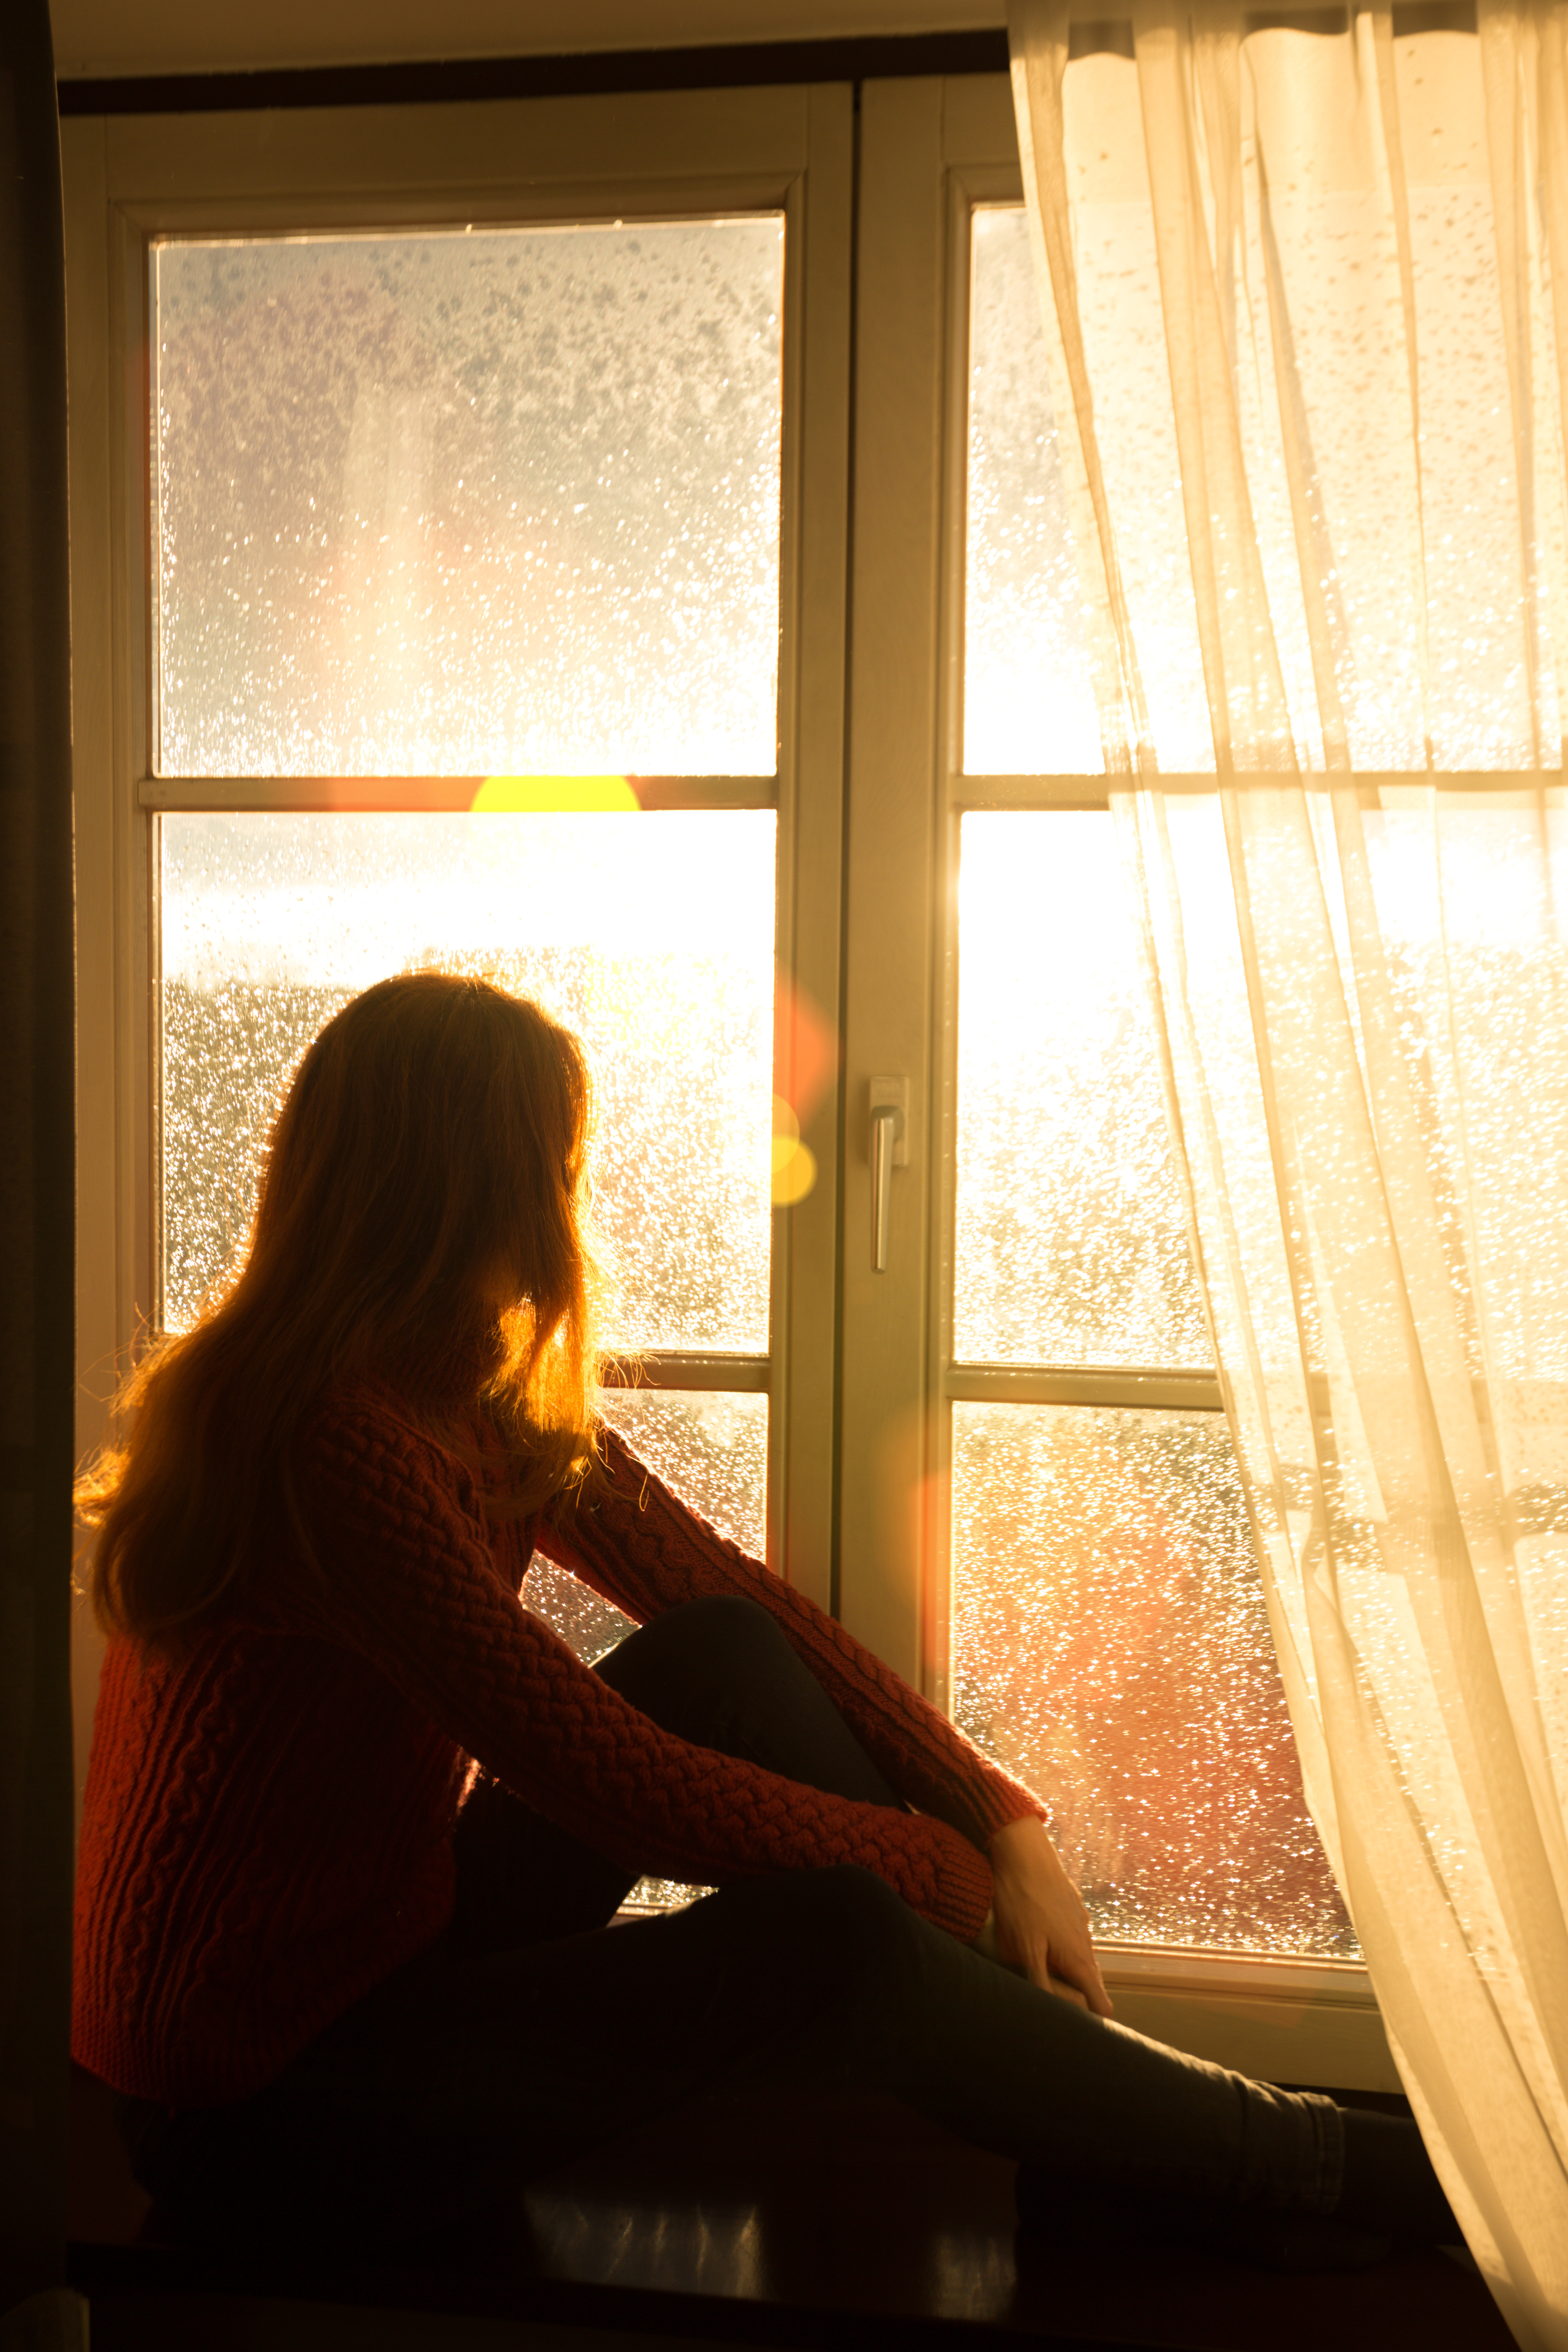 A woman sitting by her window - find Southlake multiple sclerosis treatment today with Light Lounge.